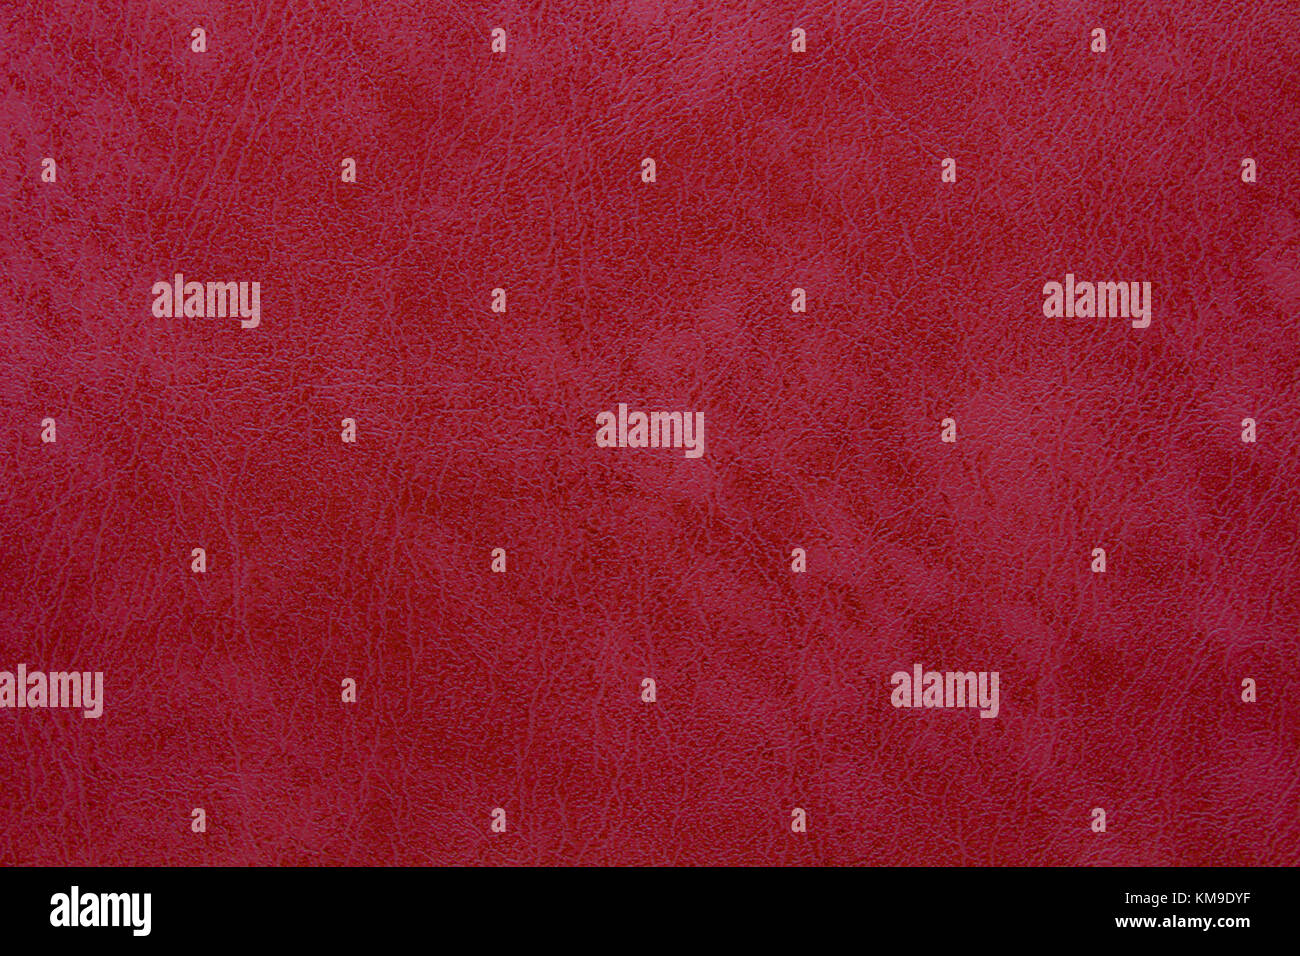 Surface of Leatherette, Leatherette texture, Leatherette background. Stock Photo